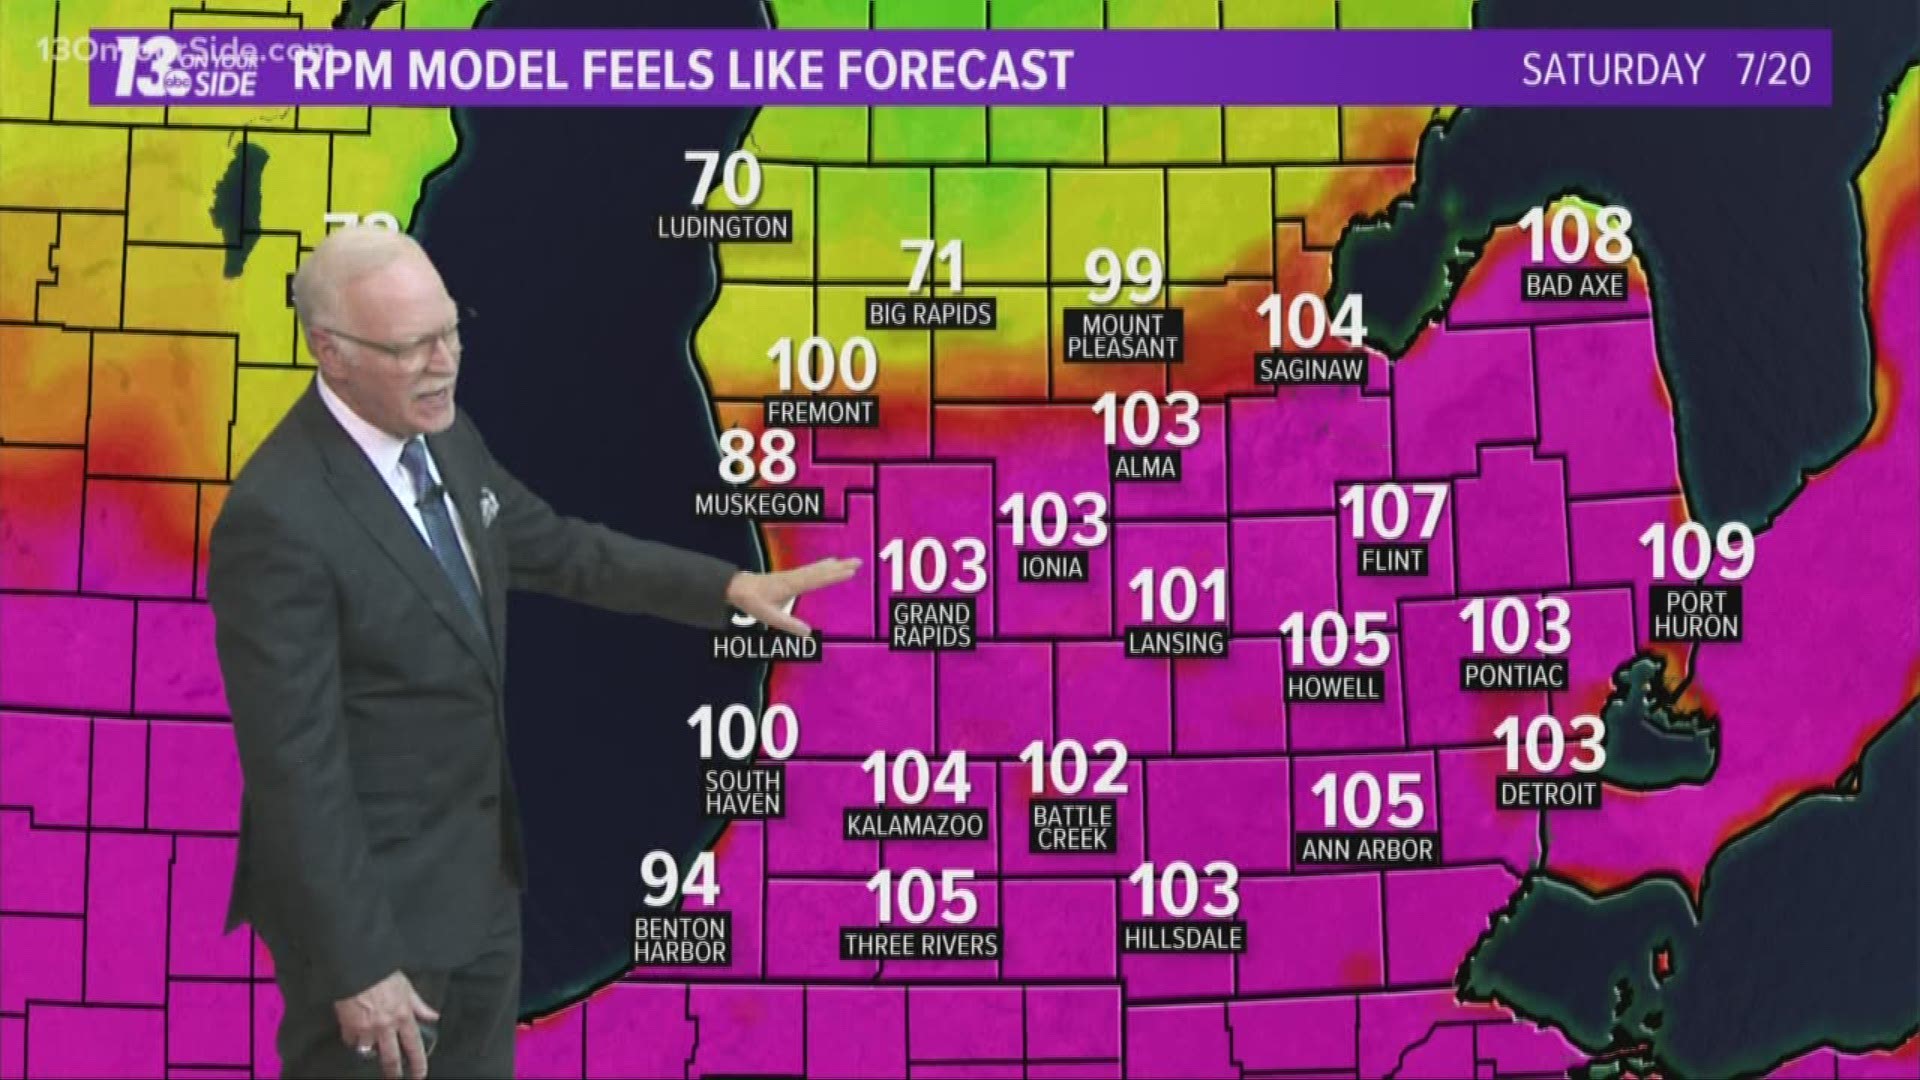 Chief Meteorologist George Lessens says it could feel like upwards of 100 degrees.